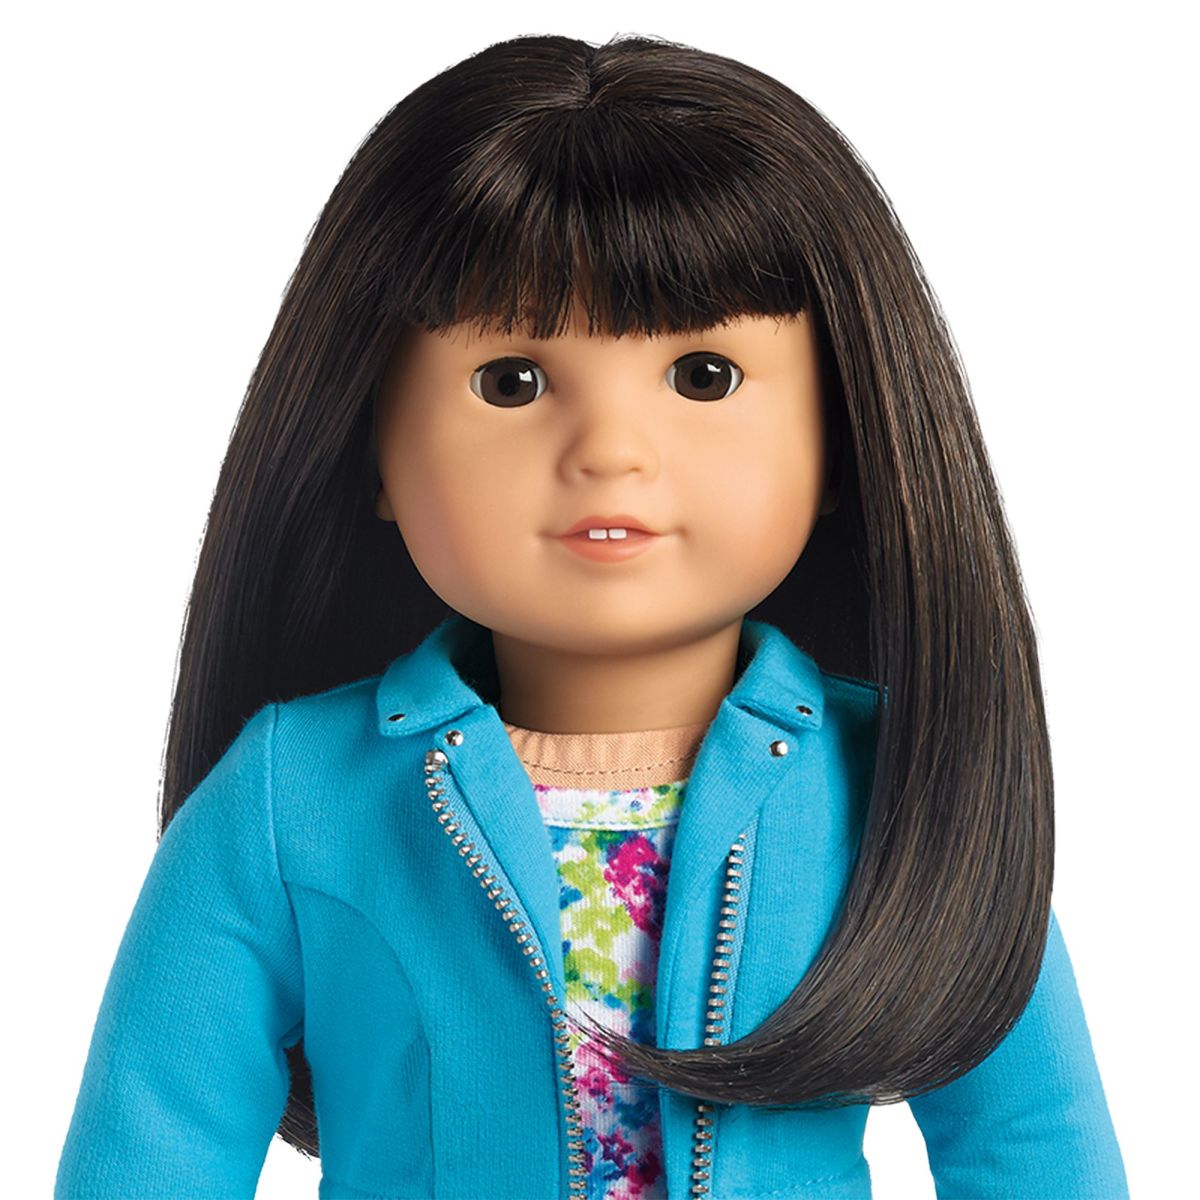 My Favorite Truly Me Dolls from American Girl